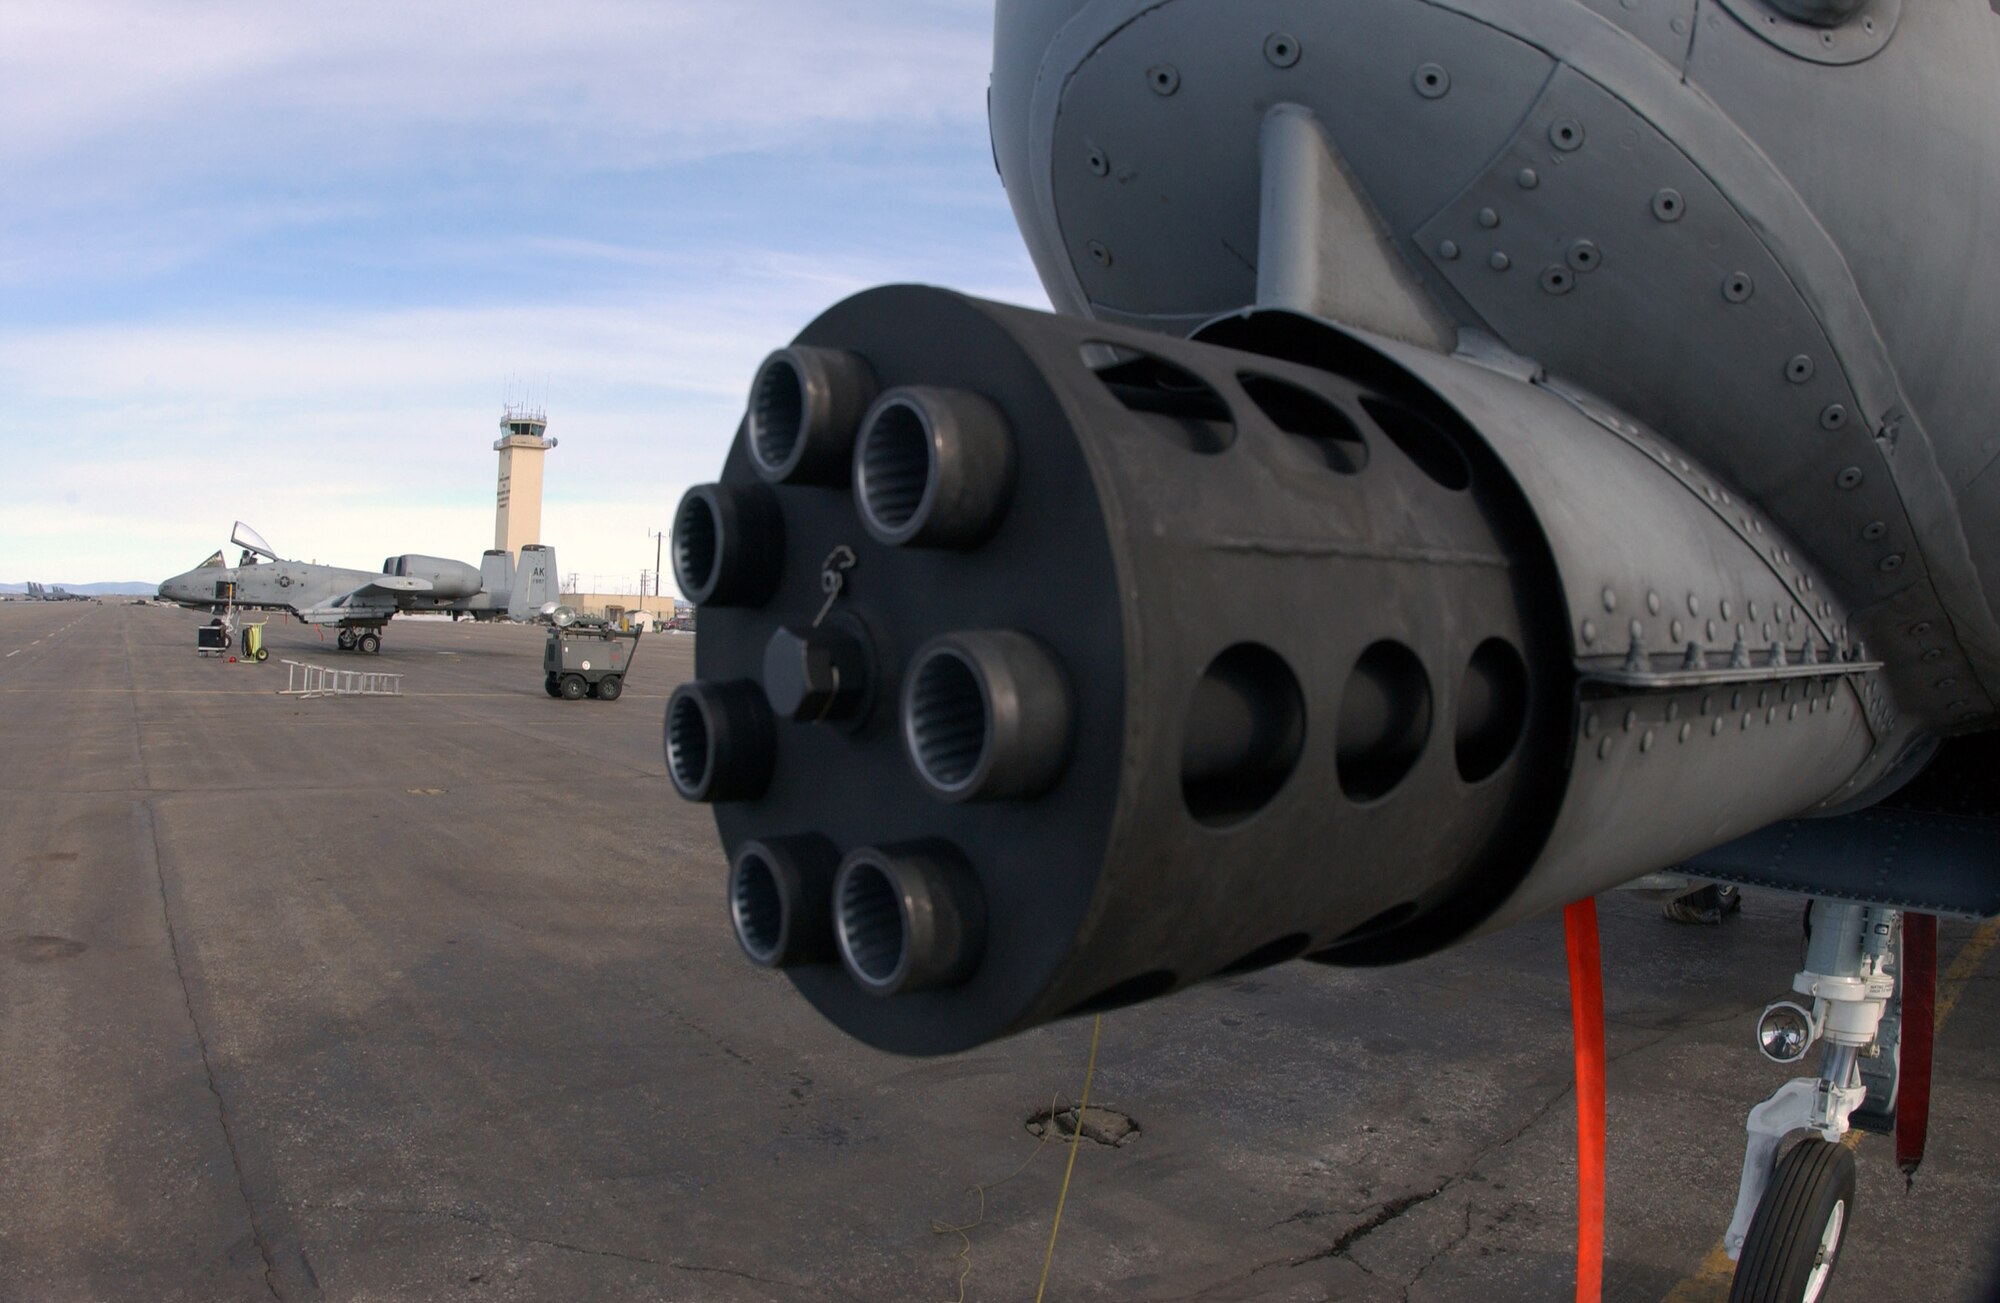 Two A-10 Thunderbolt IIs from the 355th Fighter Squadron at Eielson Air Force Base, Alaska, sit on the flightline awaiting the next mission. On the nose of the A-10 is a 30mm GAU-8 Avenger seven-barrel Gatling gun which is used to pierce heavy armor.  (U.S. Air Force photo/Senior Airman Joshua Strang)